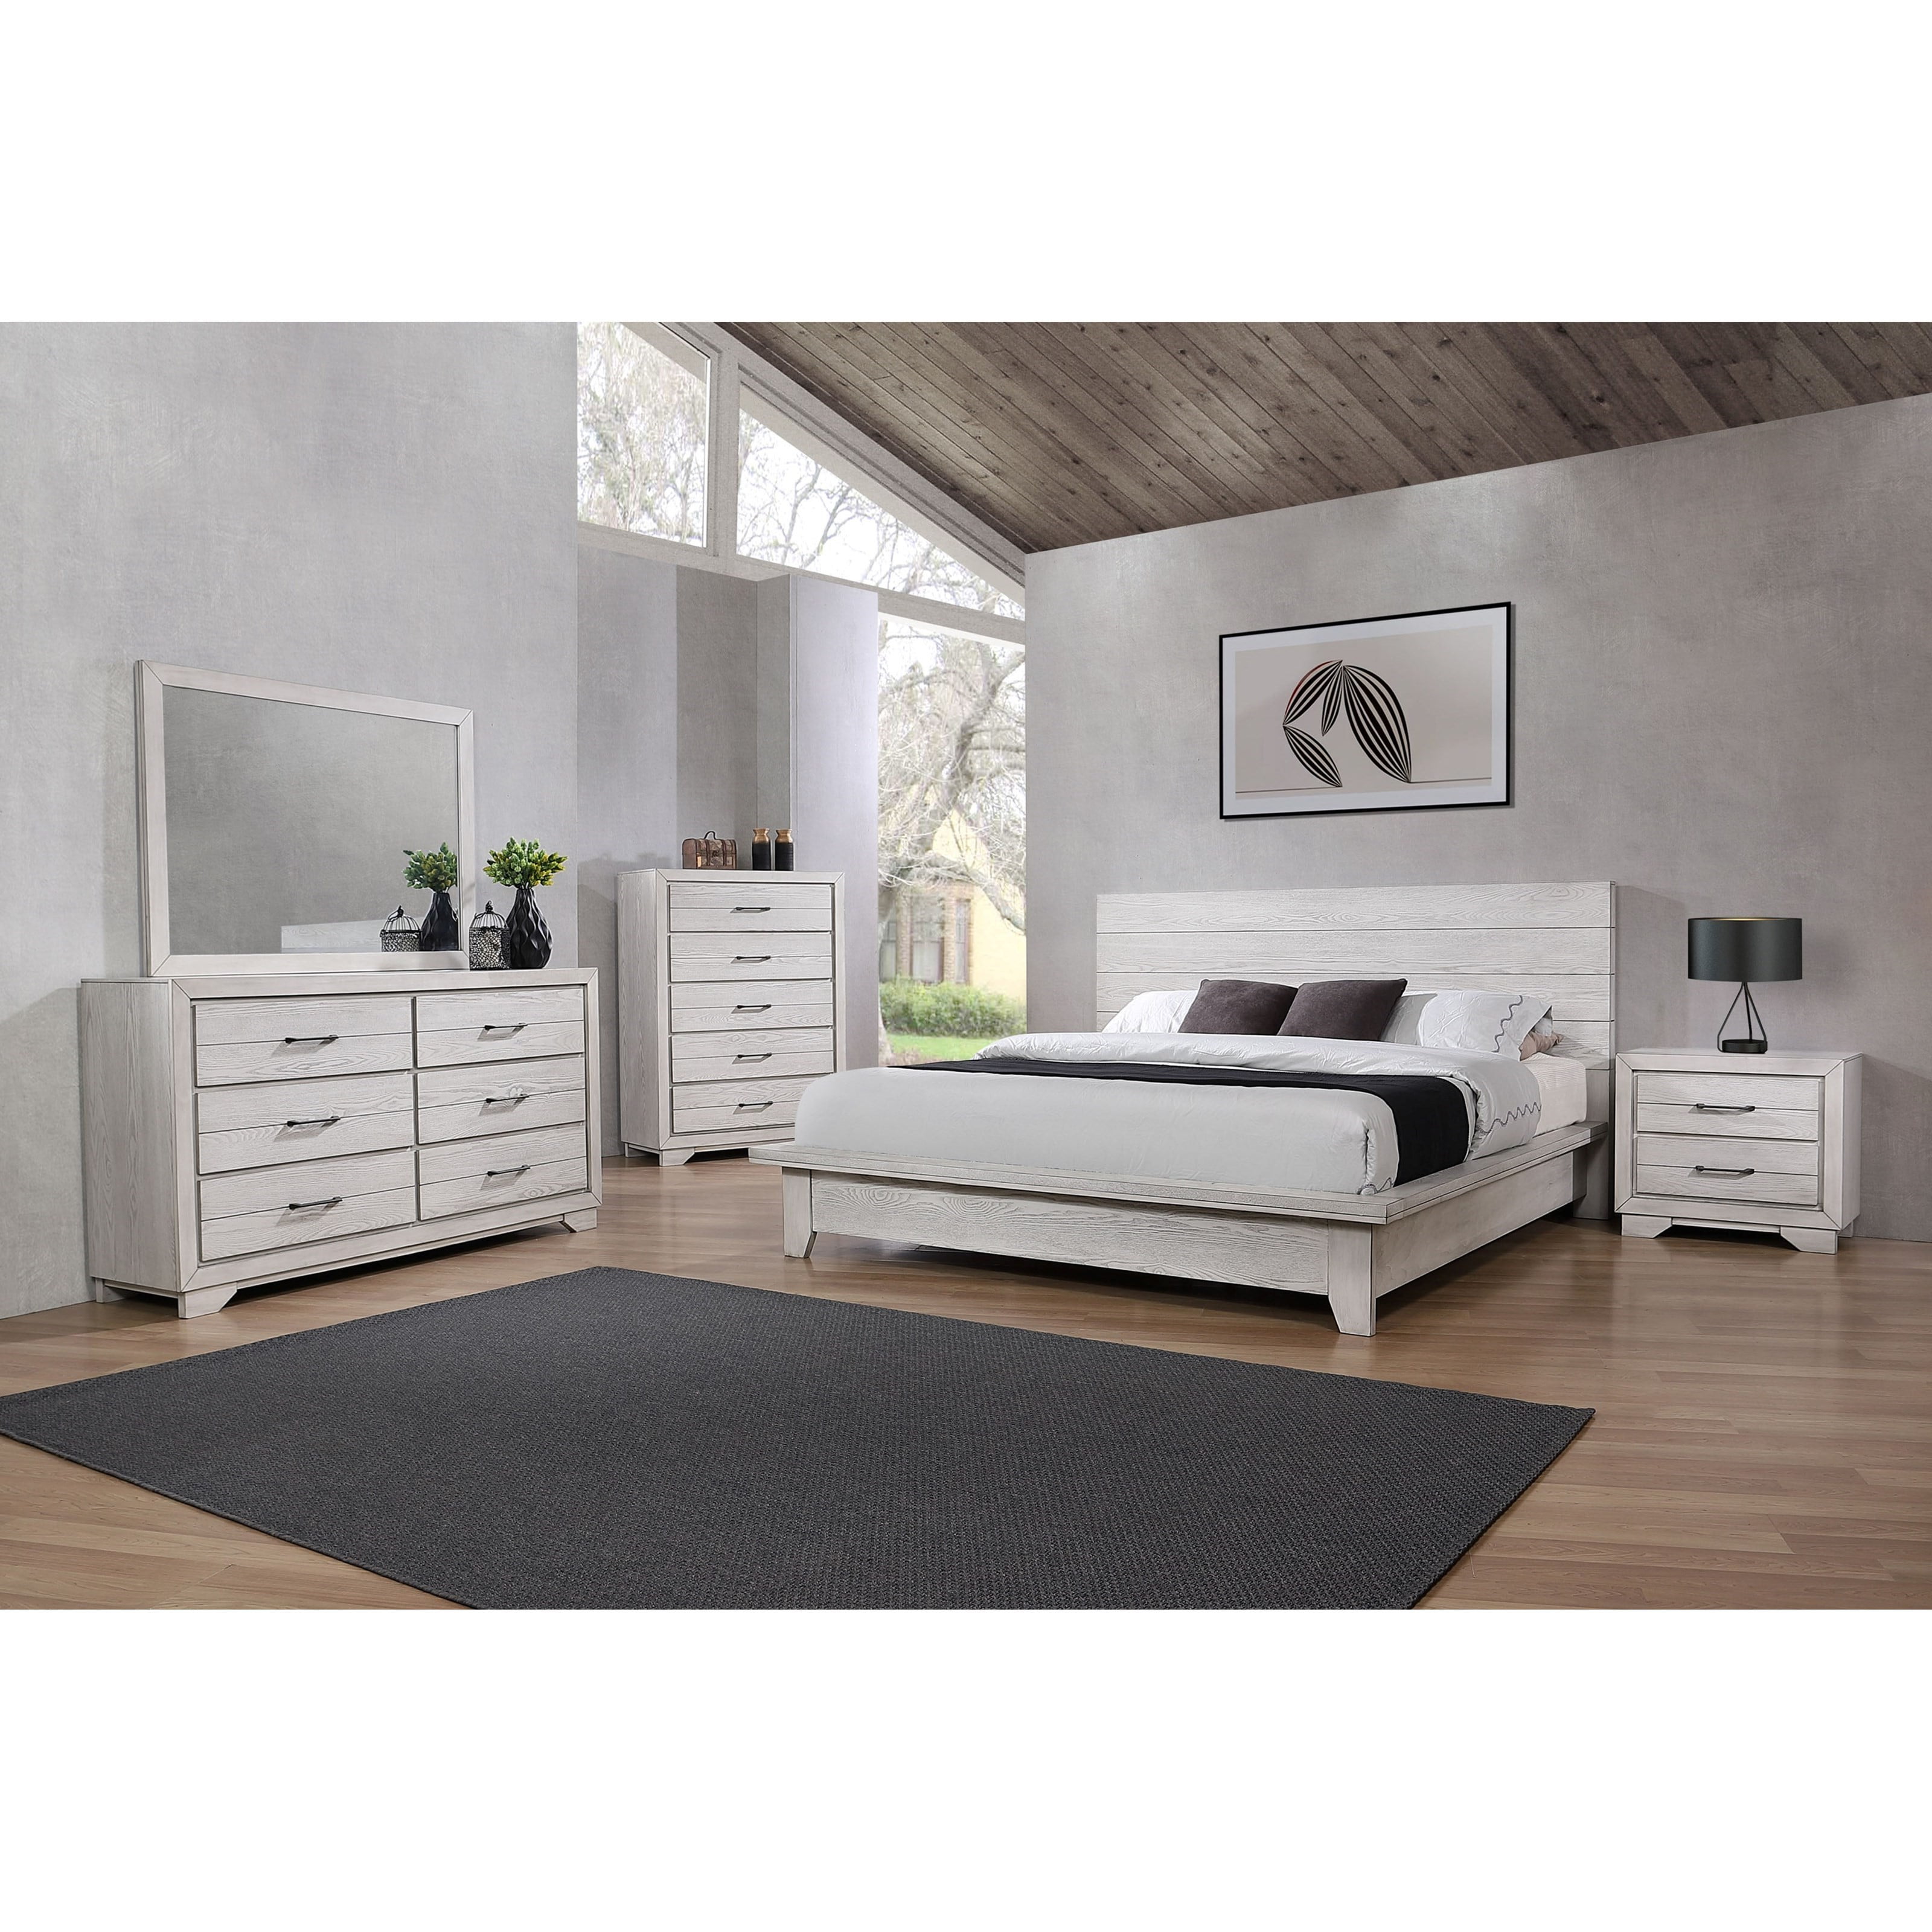 Modern Look White Finish 4pc Queen Size, Modern Dresser And Nightstand Set White